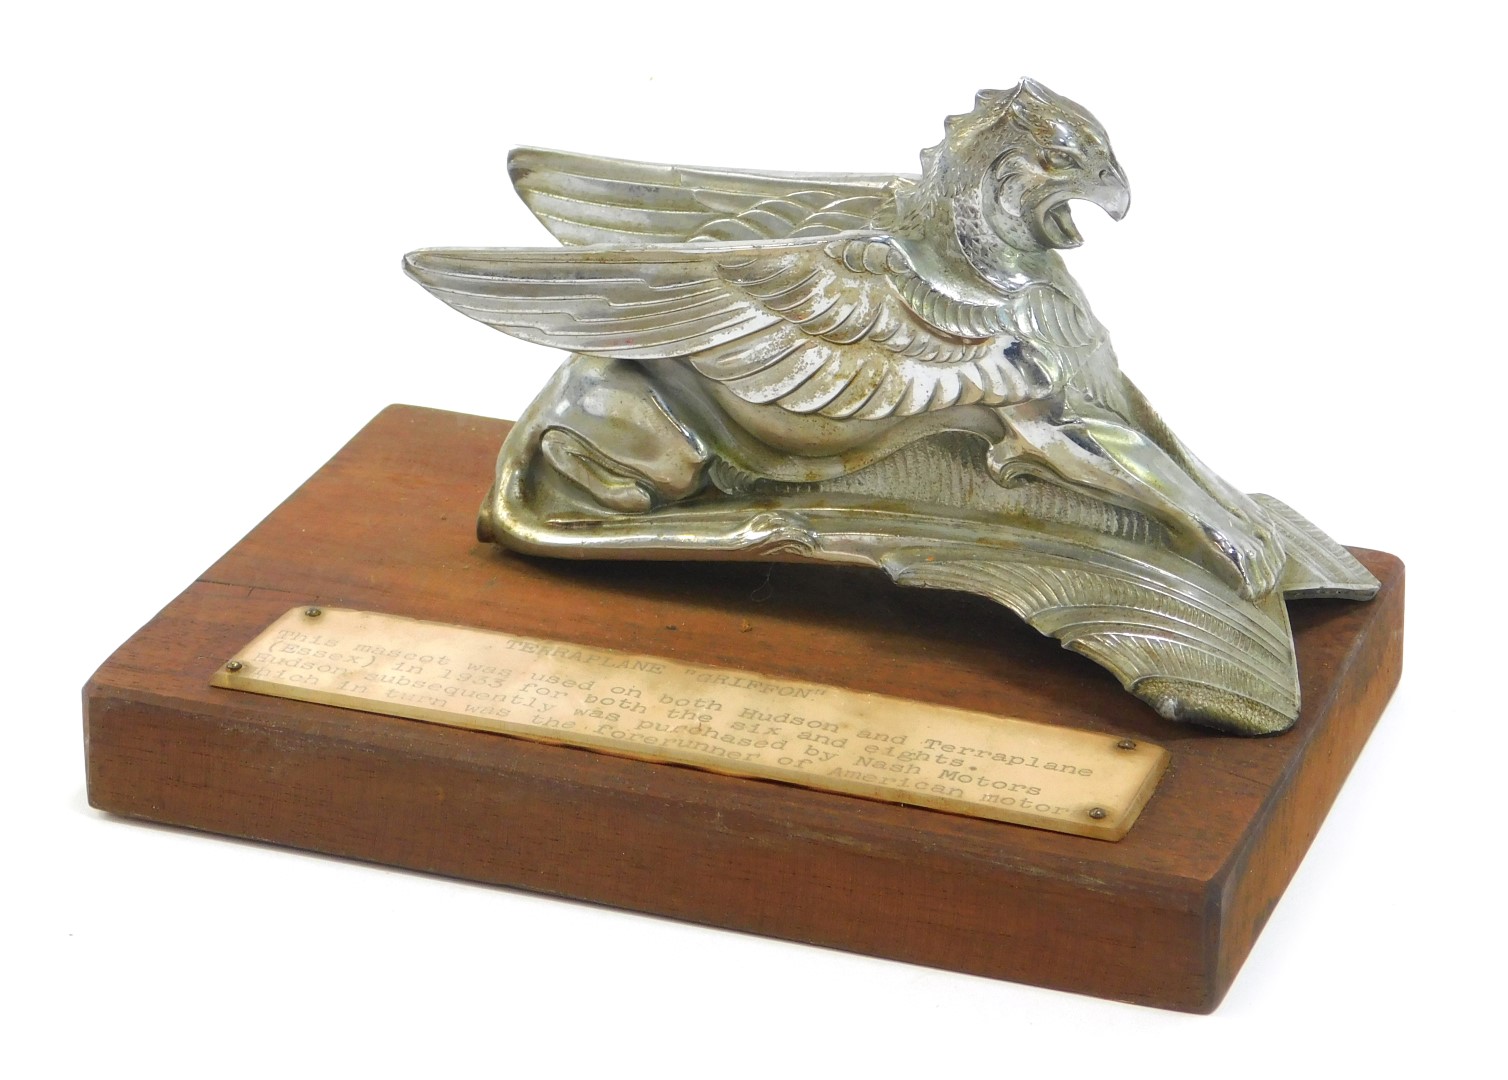 A Terraplane Griffin car mascot, used on both Hudsons and terraplanes, mounted on a rectangular wood